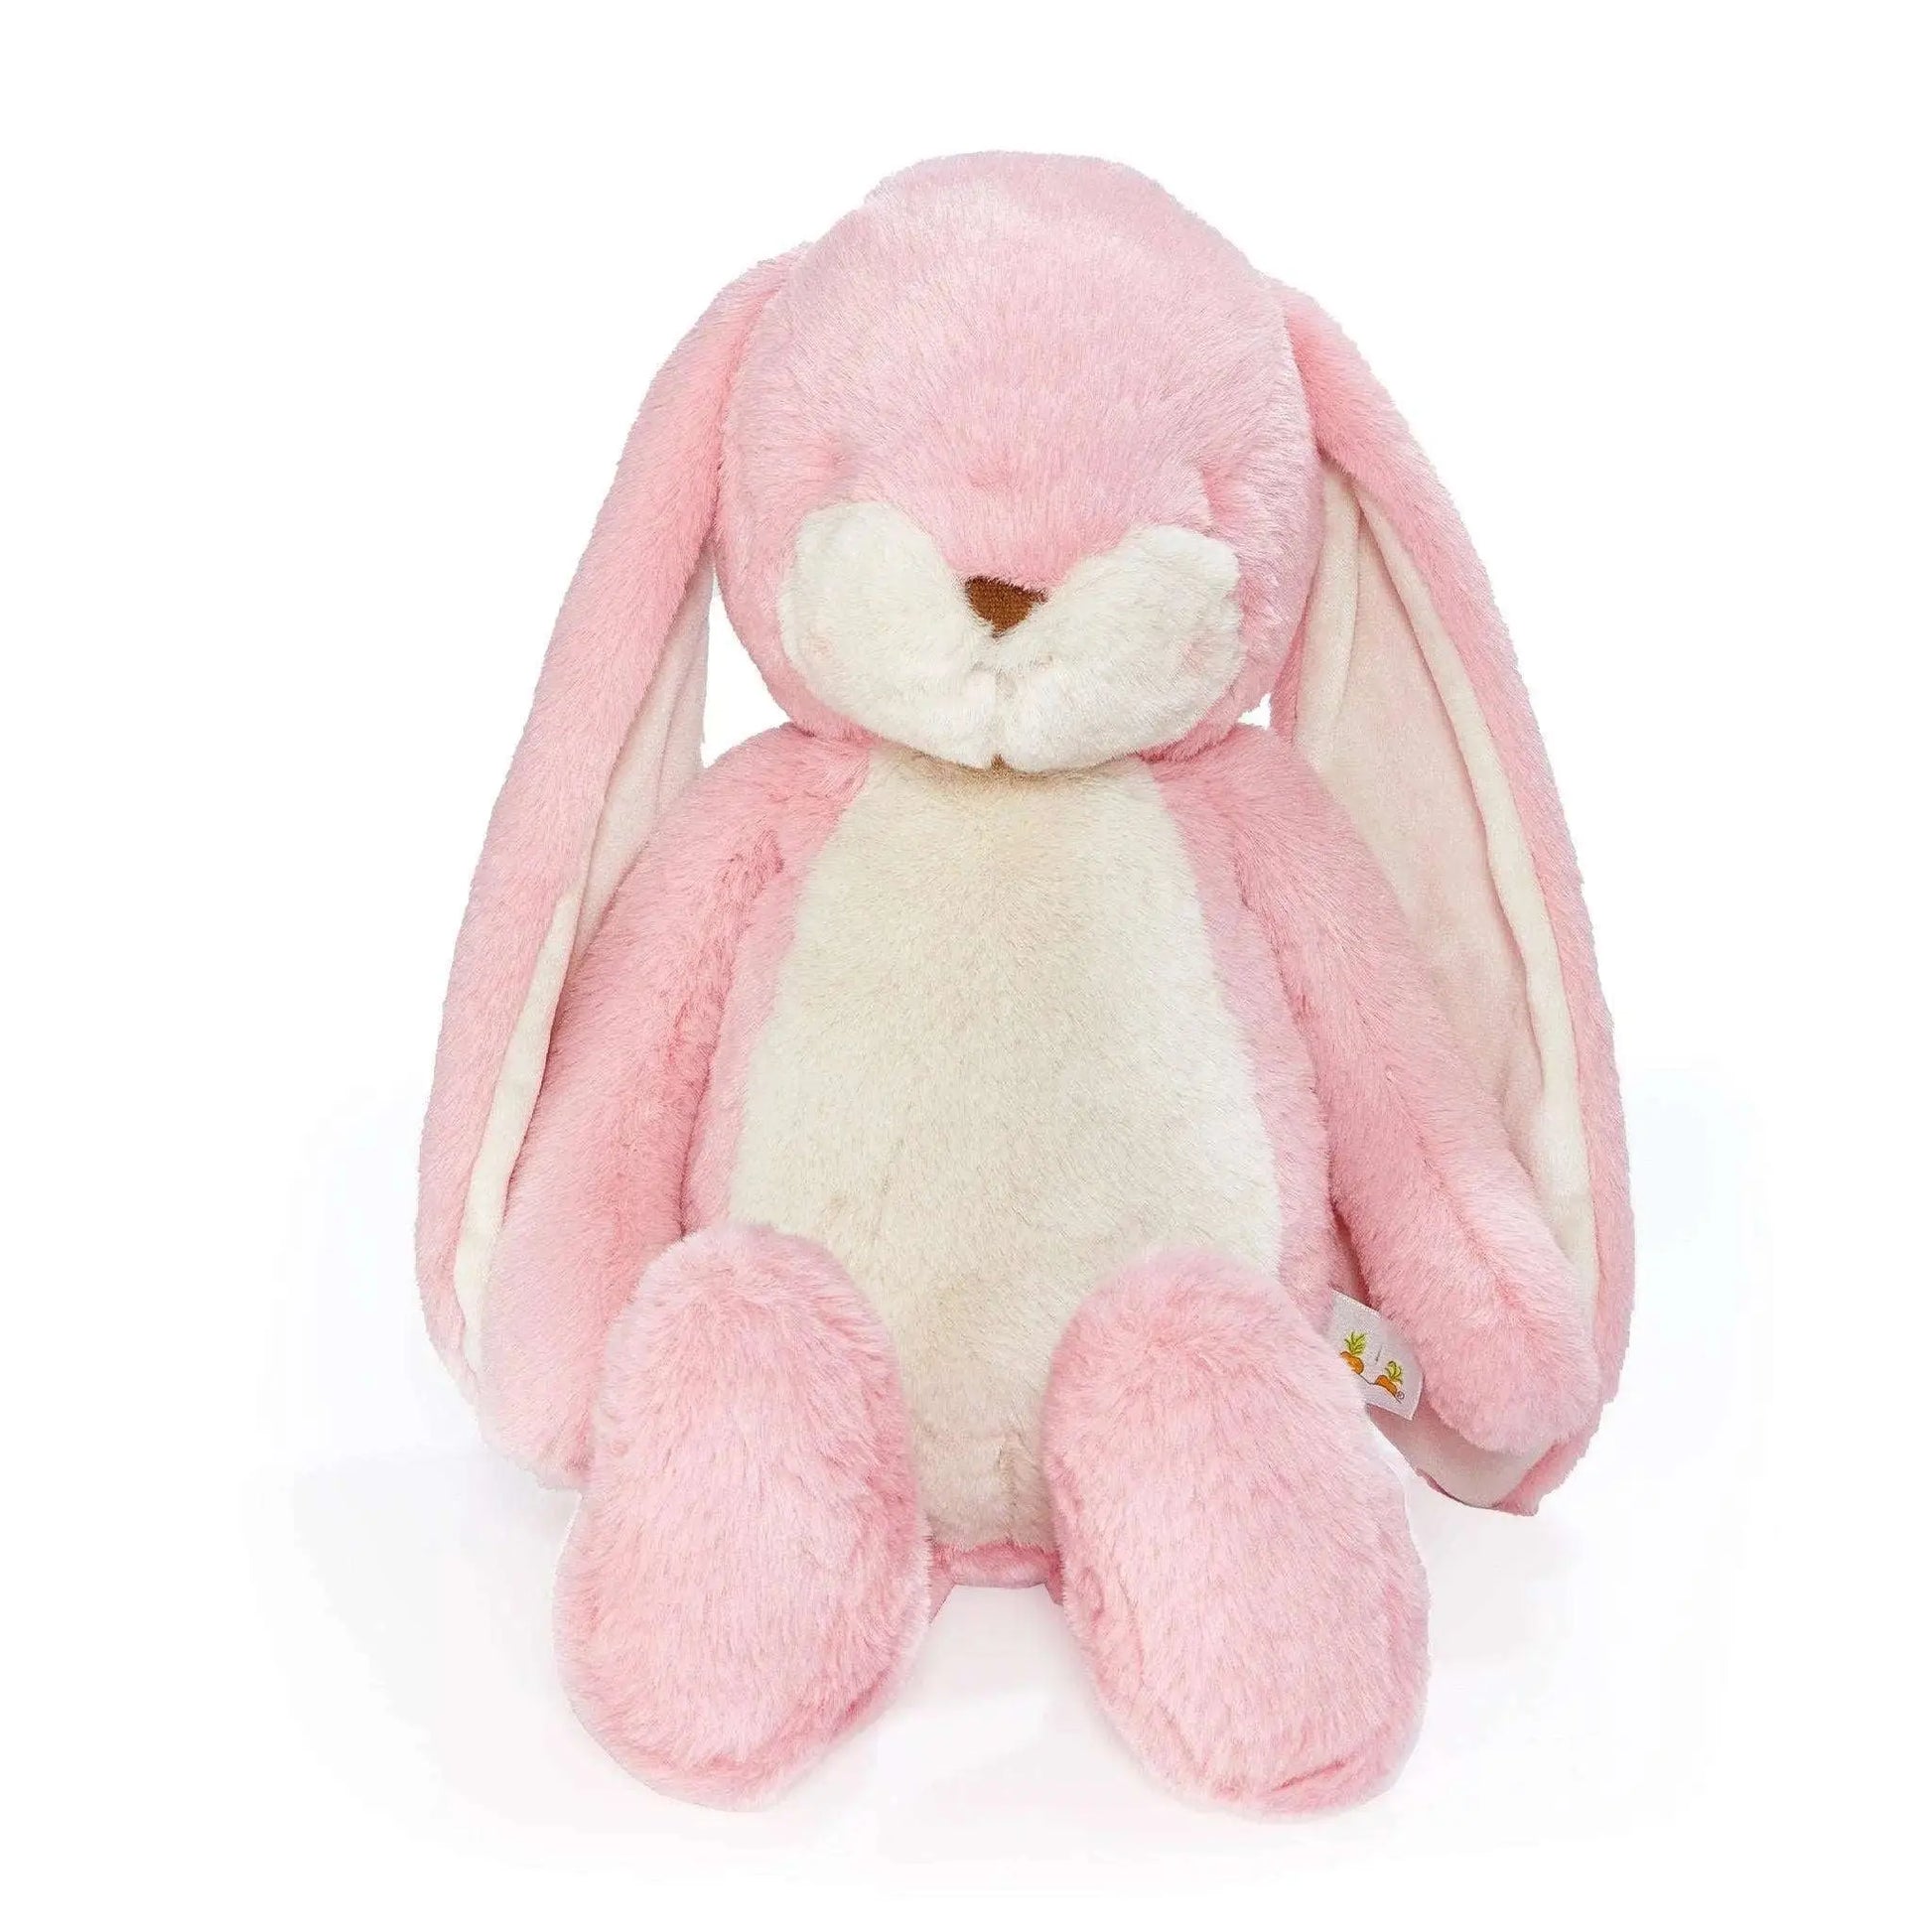 Big Nibble 20" Bunny - Coral Blush Bunnies By the Bay An Initial Impression